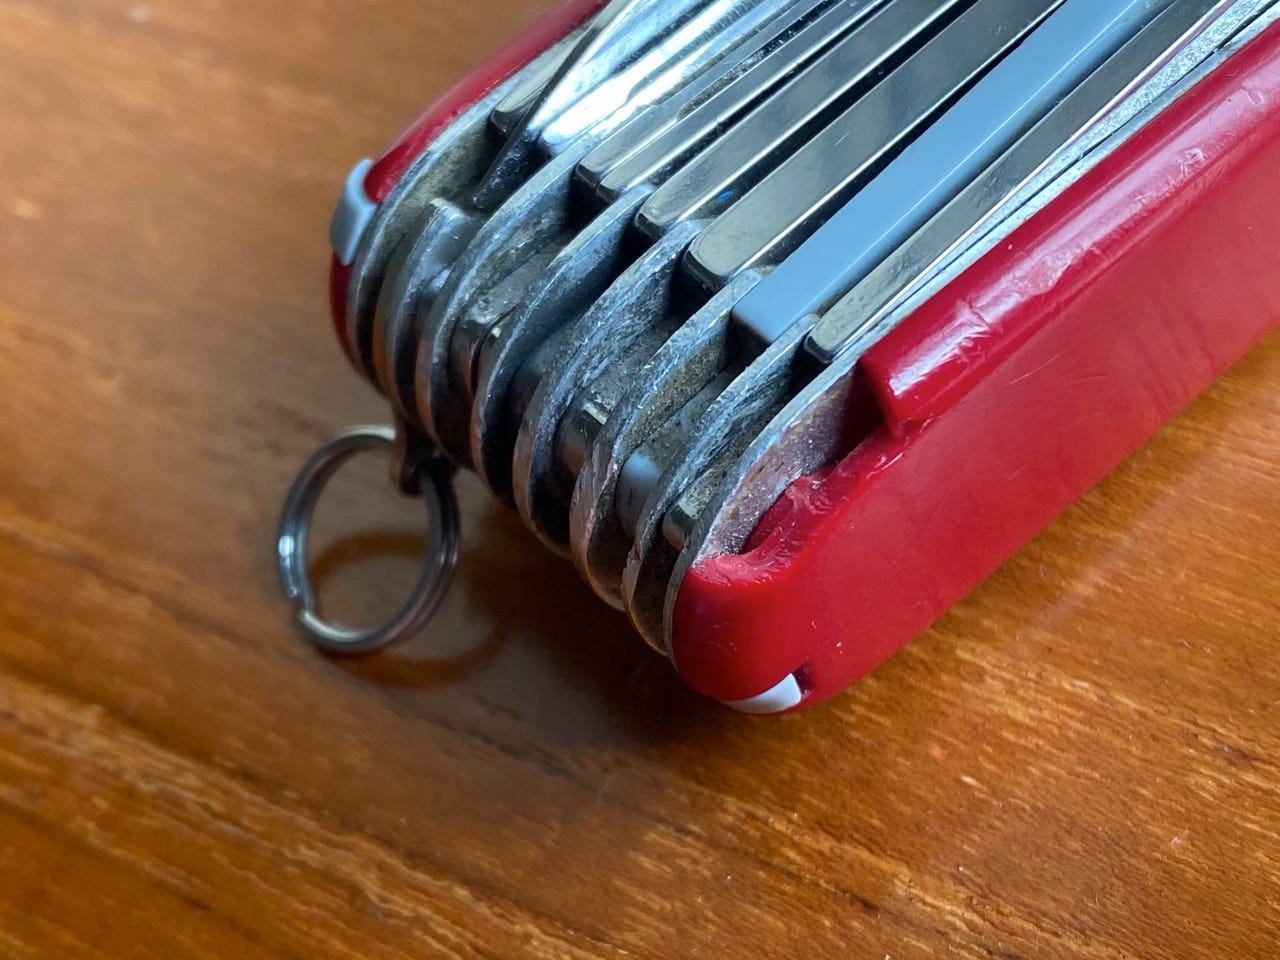 My old and busted 30-year-old Victorinox SwissChamp